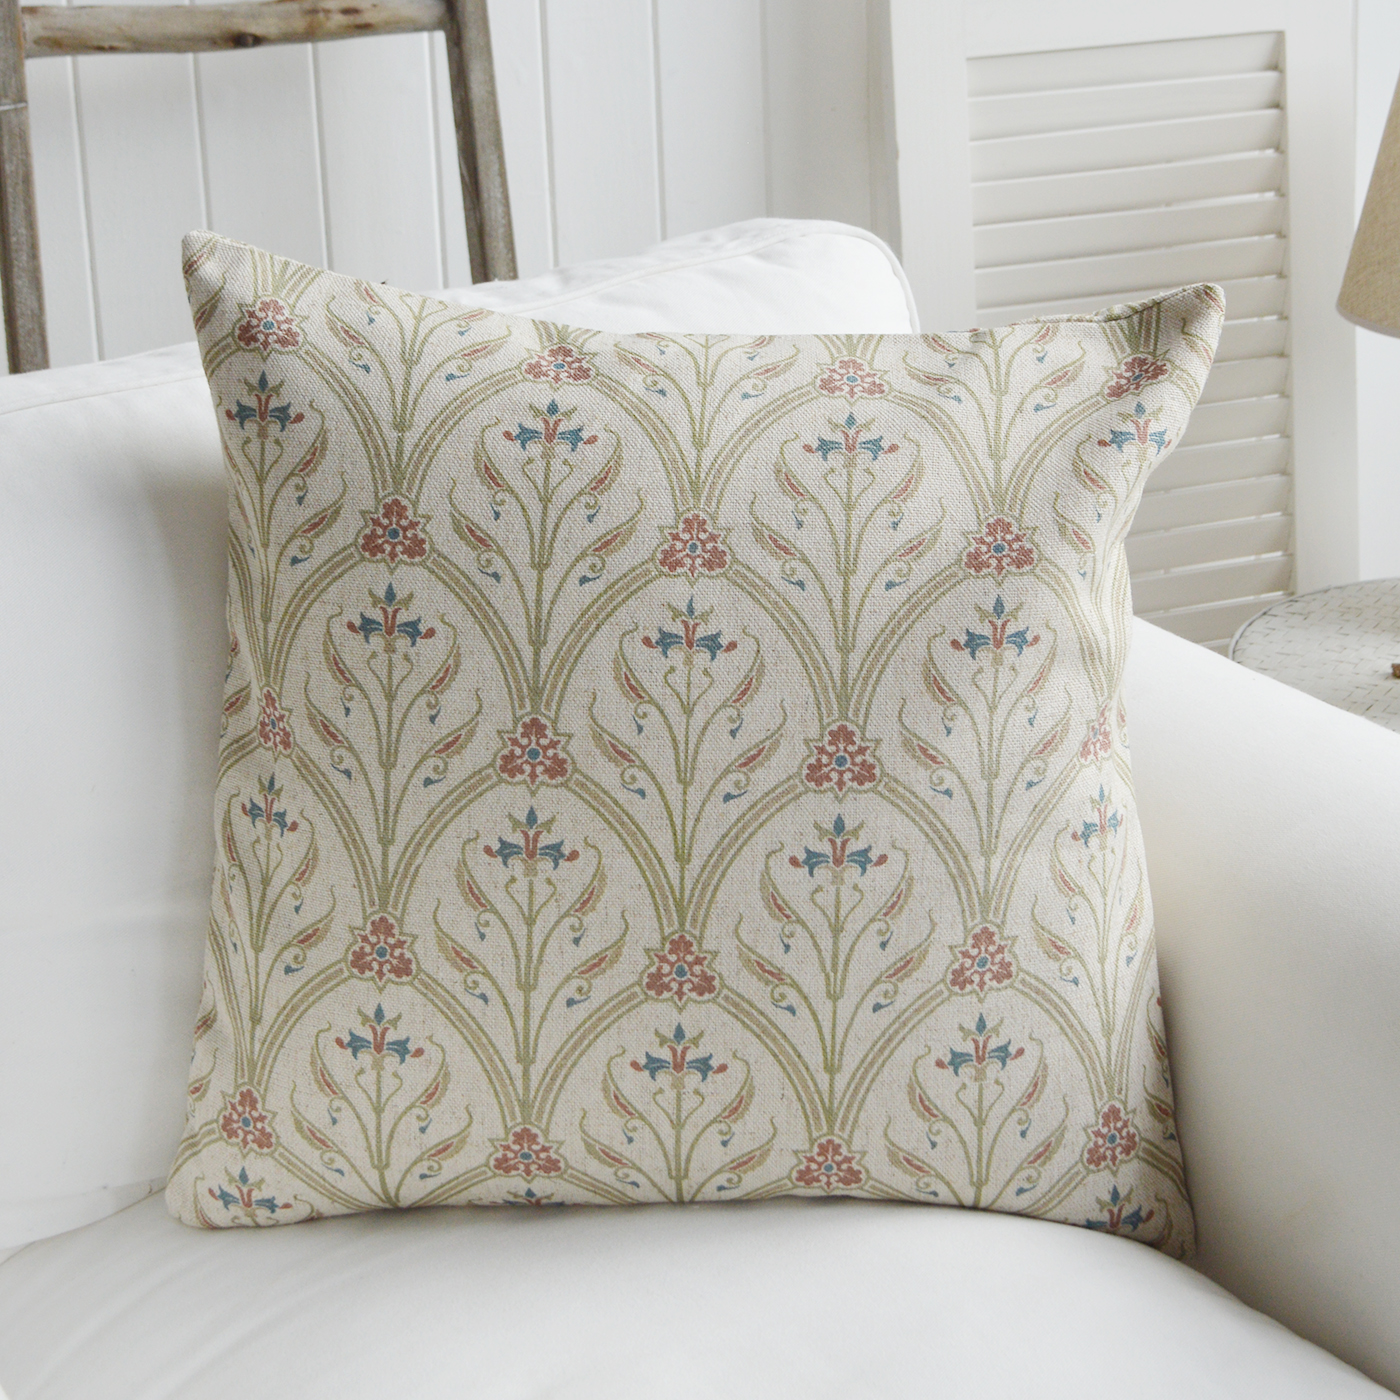 Colton Floral cushion - Luxury New England style cushions. Country, coastal and Modern Farmhouse homes and interiors